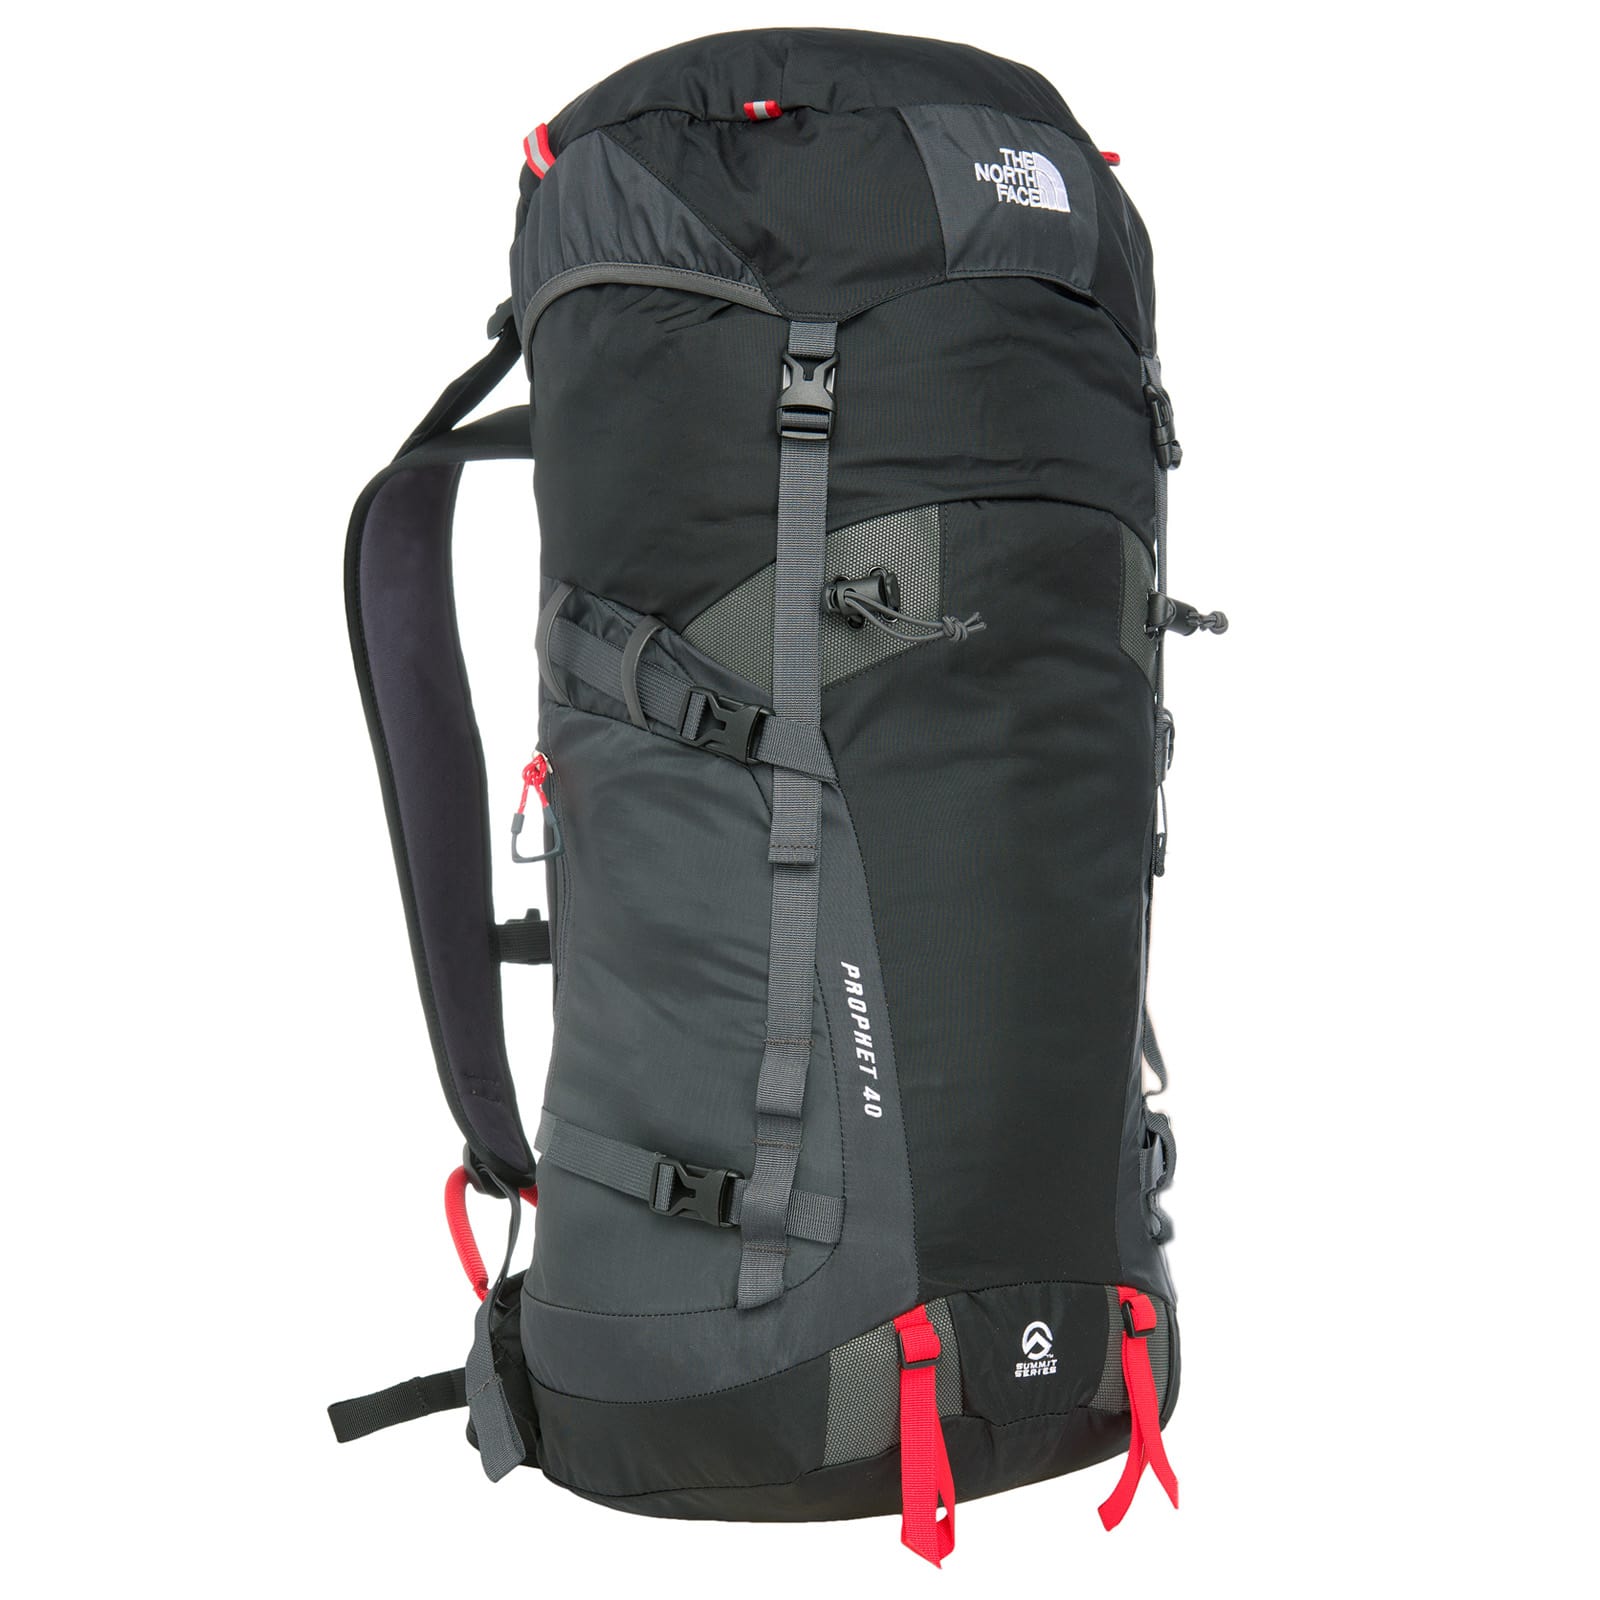 Buy The North Face Prophet 40 from Outnorth